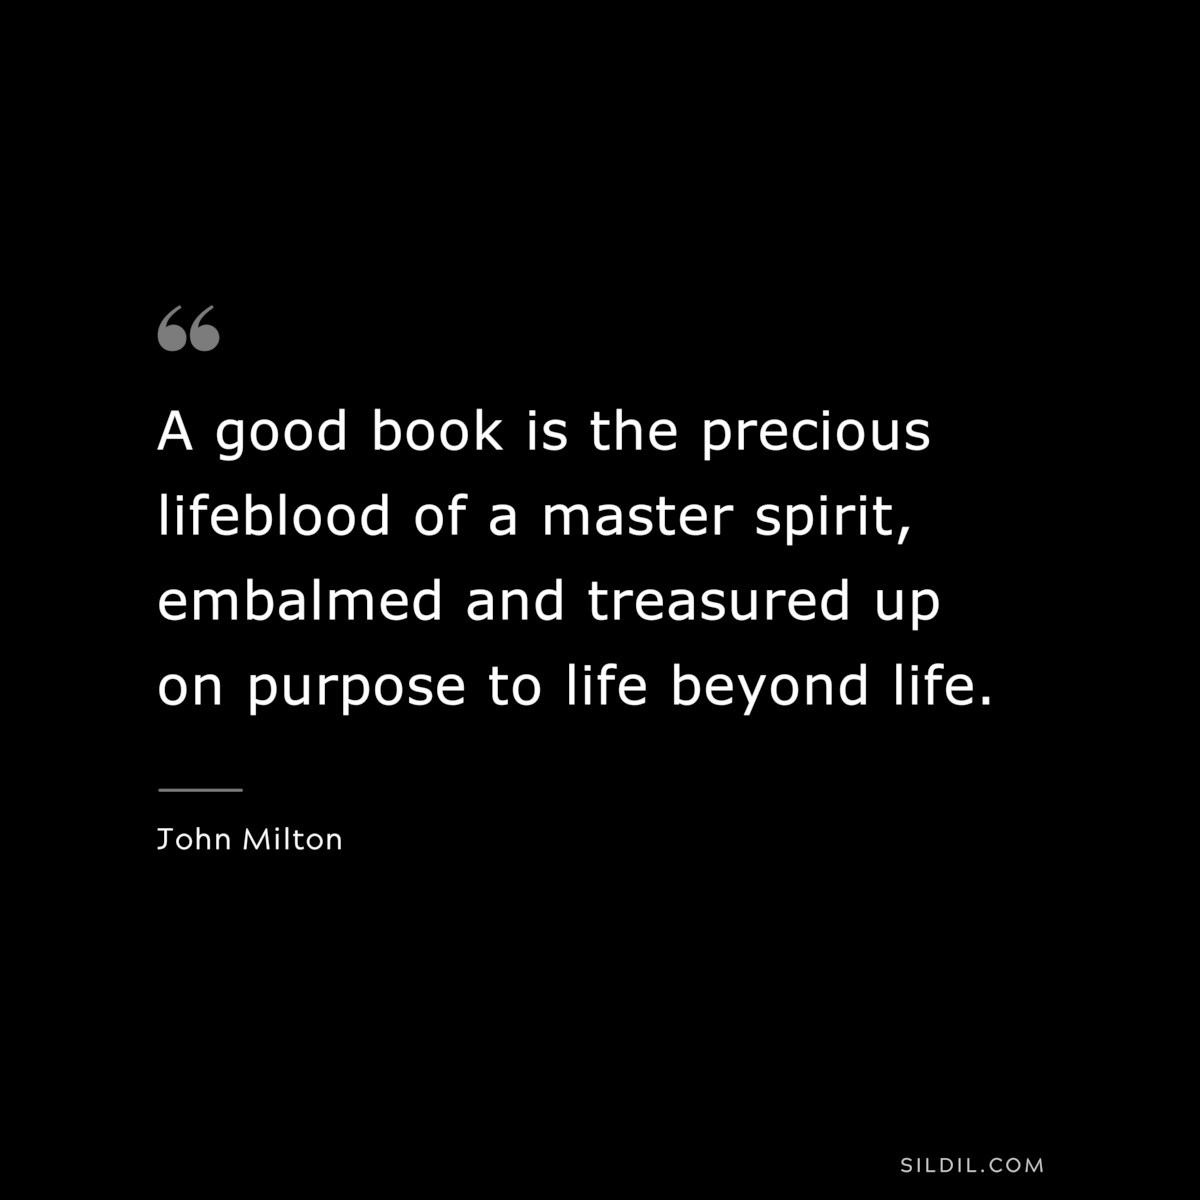 A good book is the precious lifeblood of a master spirit, embalmed and treasured up on purpose to life beyond life. ― John Milton